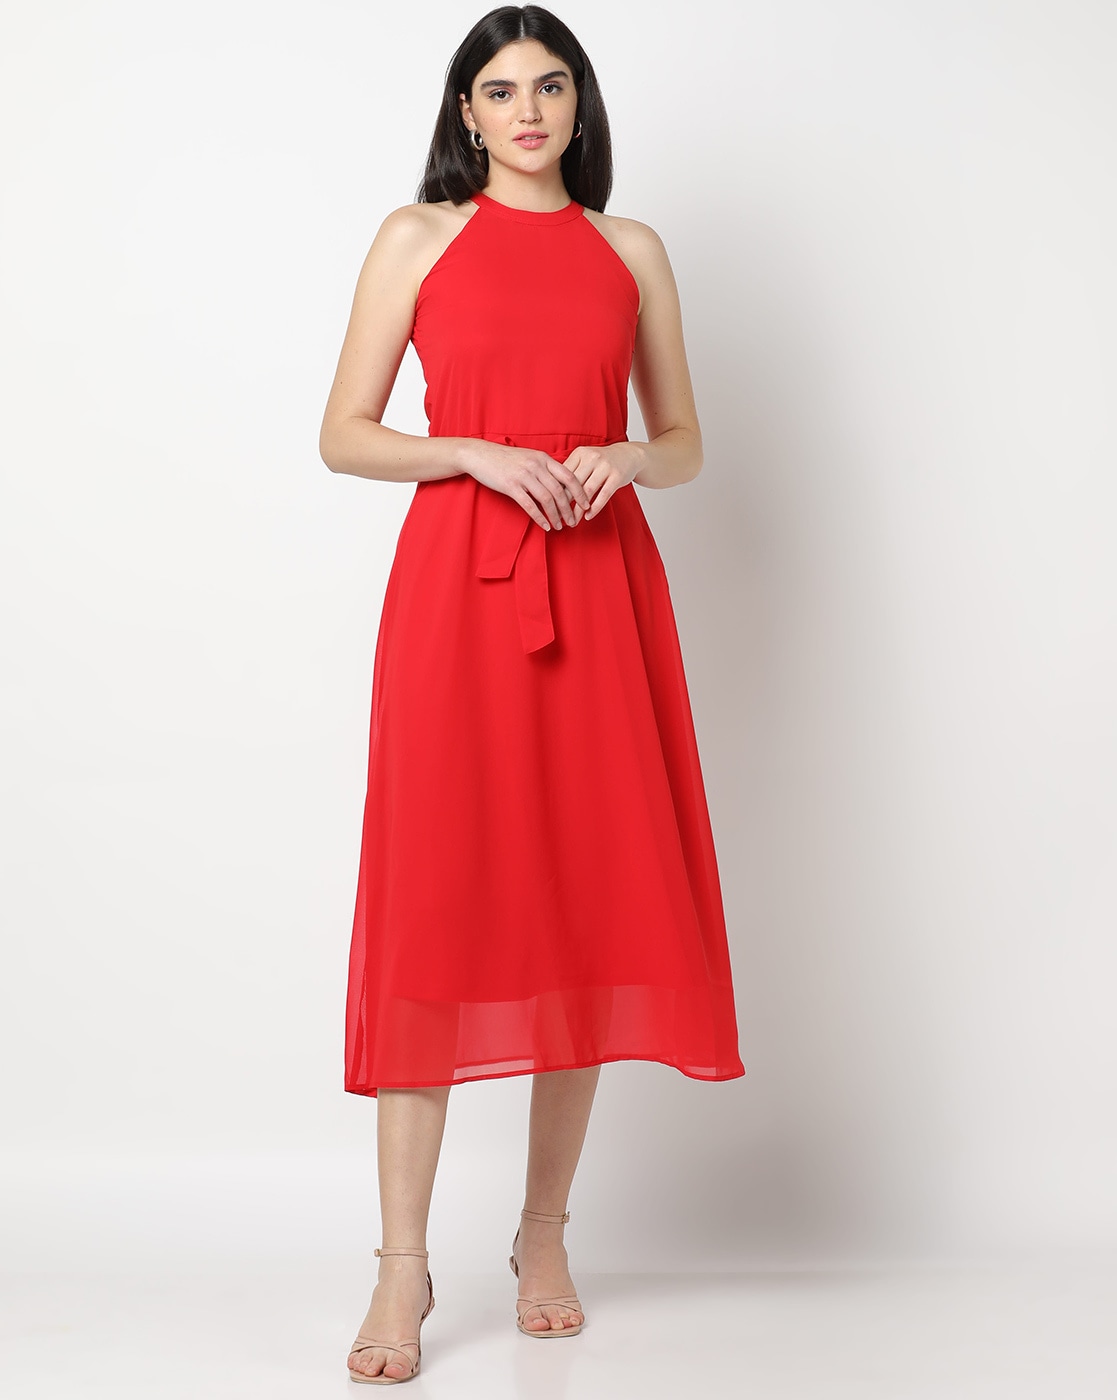 Buy red colour one piece dress for women in India @ Limeroad